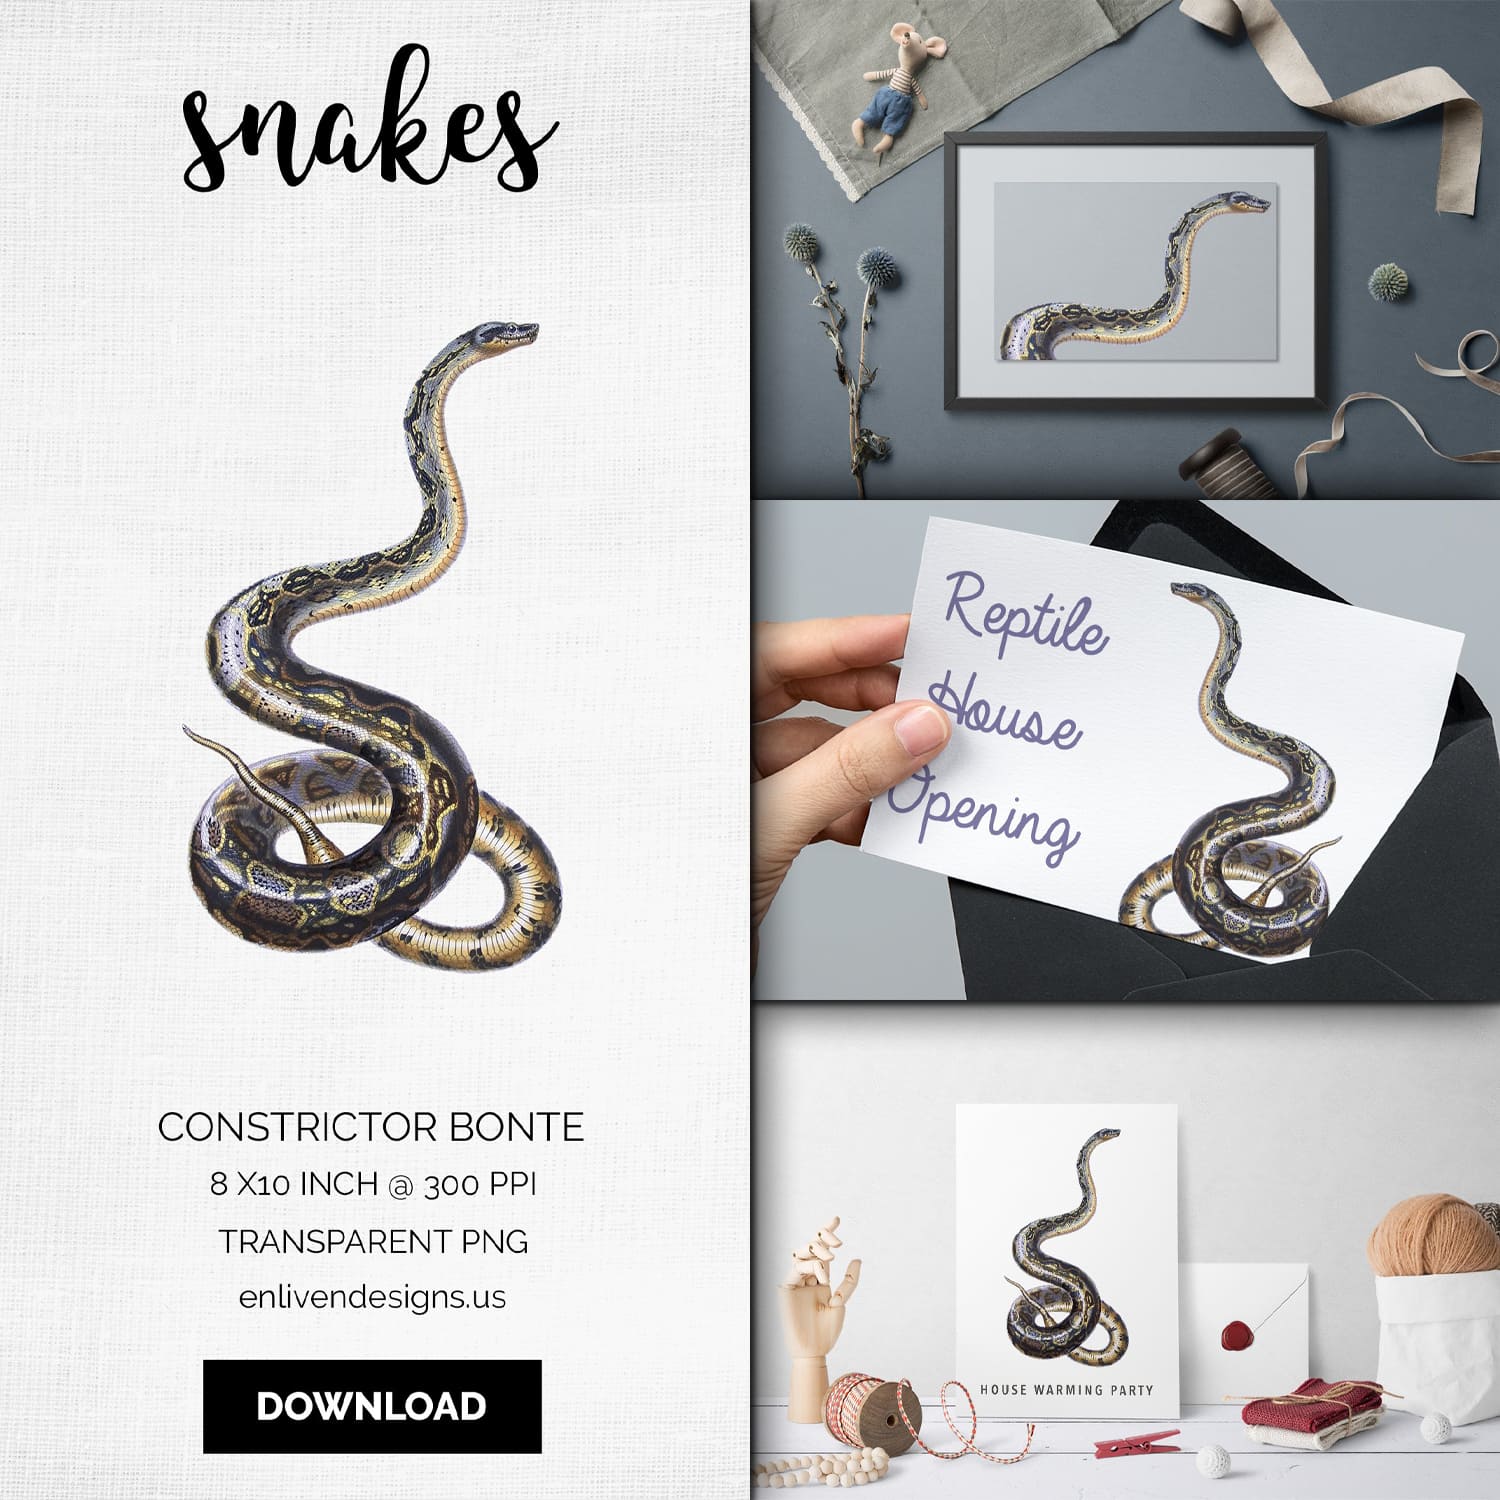 Cover images of vintage boa constrictor bonte.